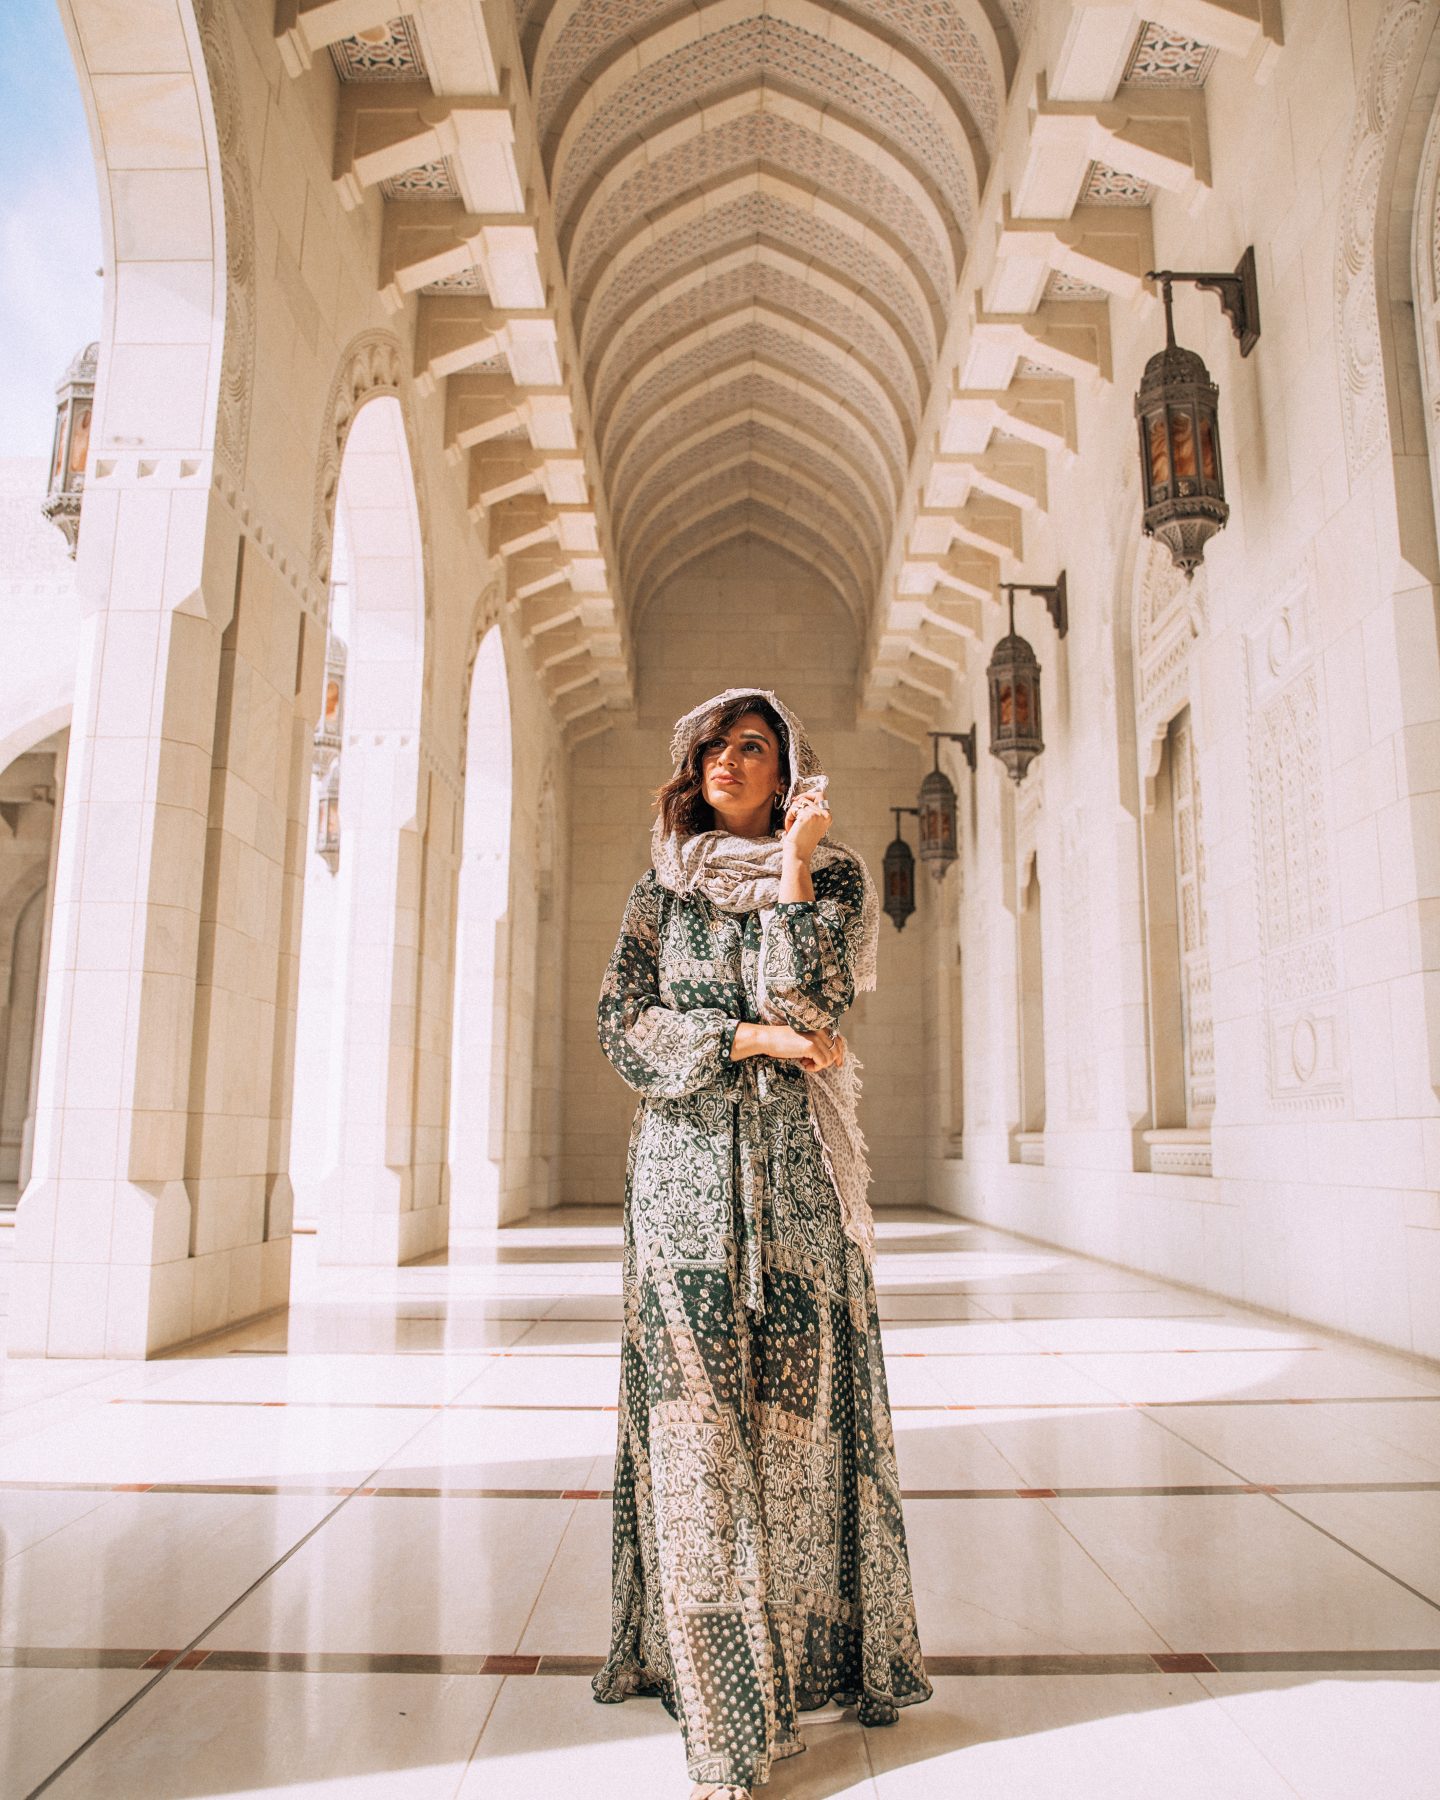 A woman in Sultan Qaboos Grand Mosque in Muscat, Oman